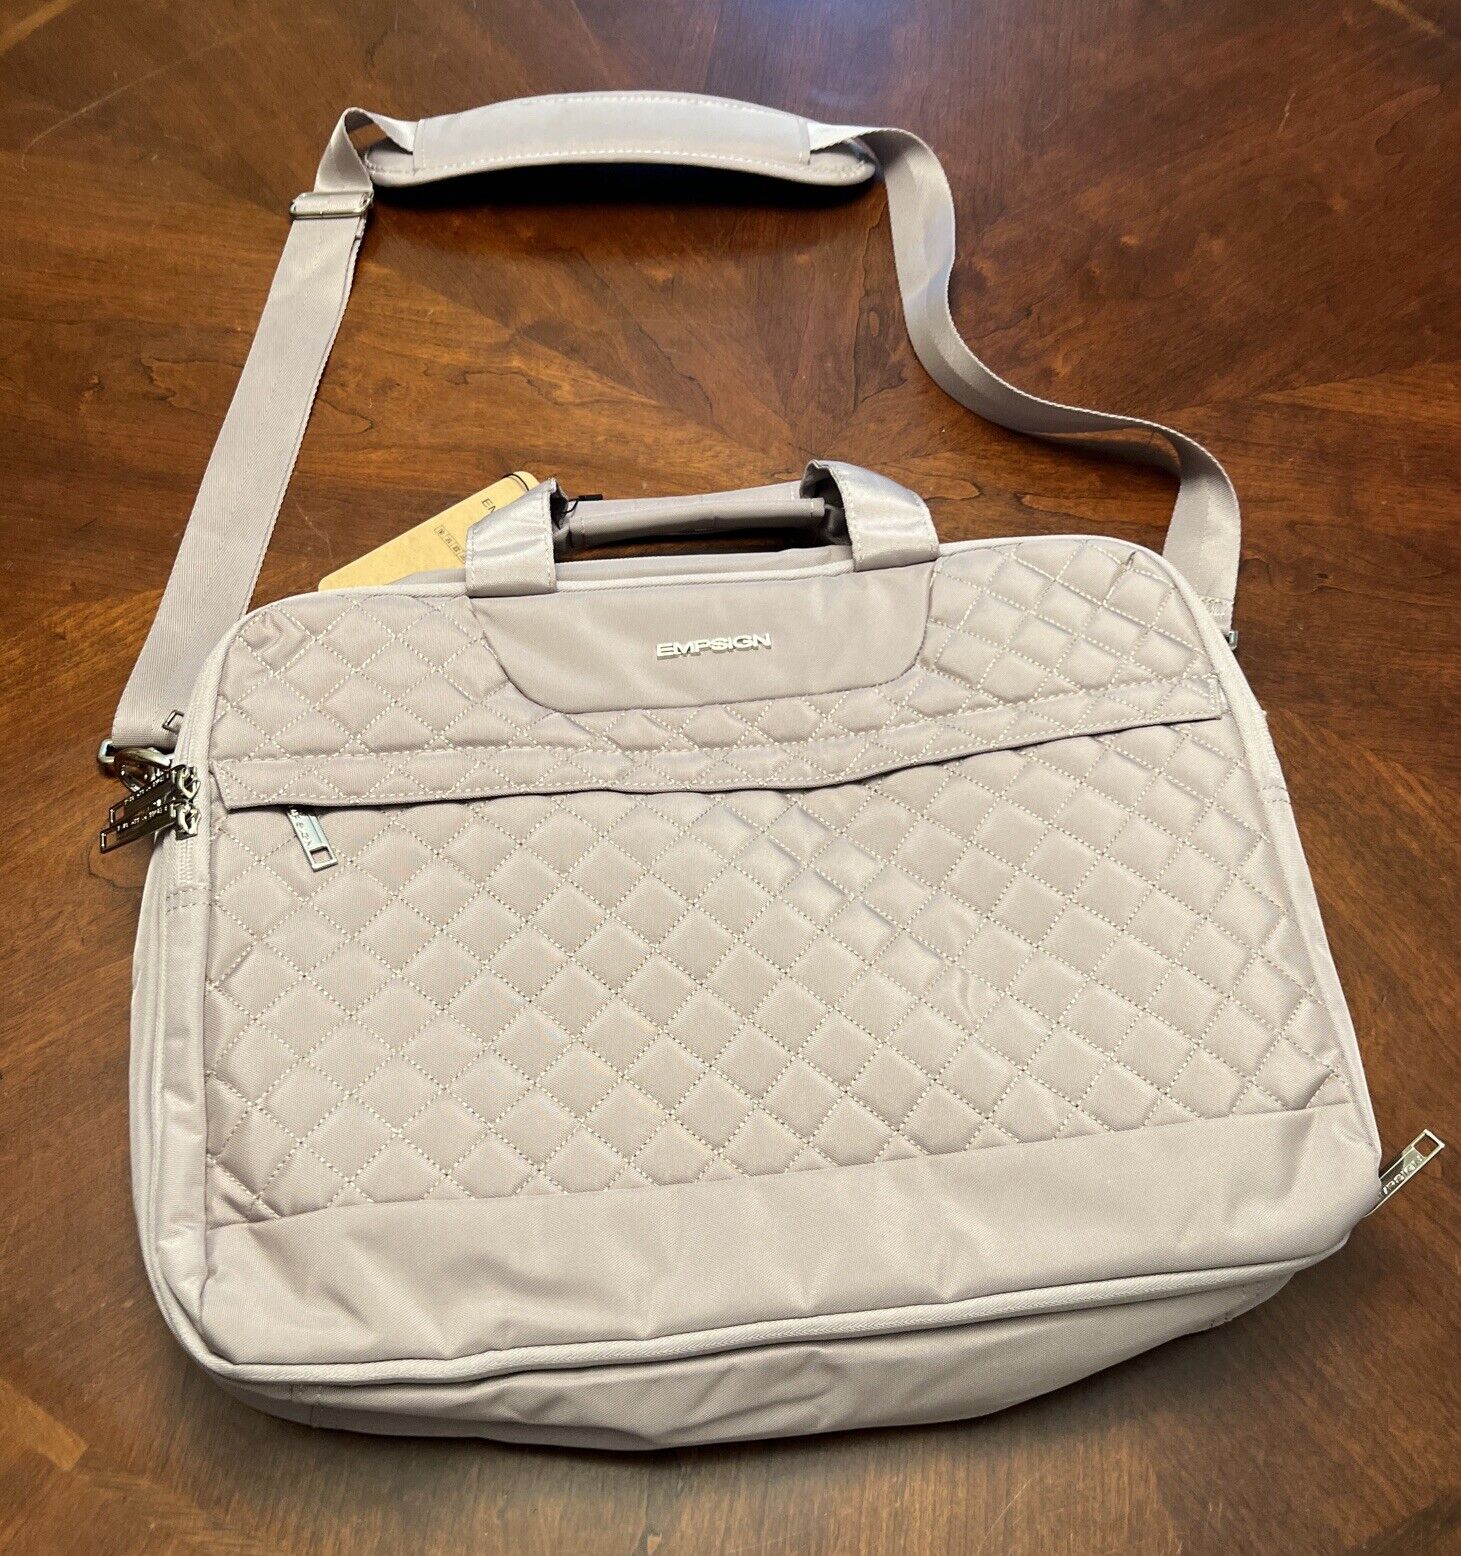 EMPSIGN Quilted Laptop Tote Bag Expandable Beige Messenger/Hand Straps NWT